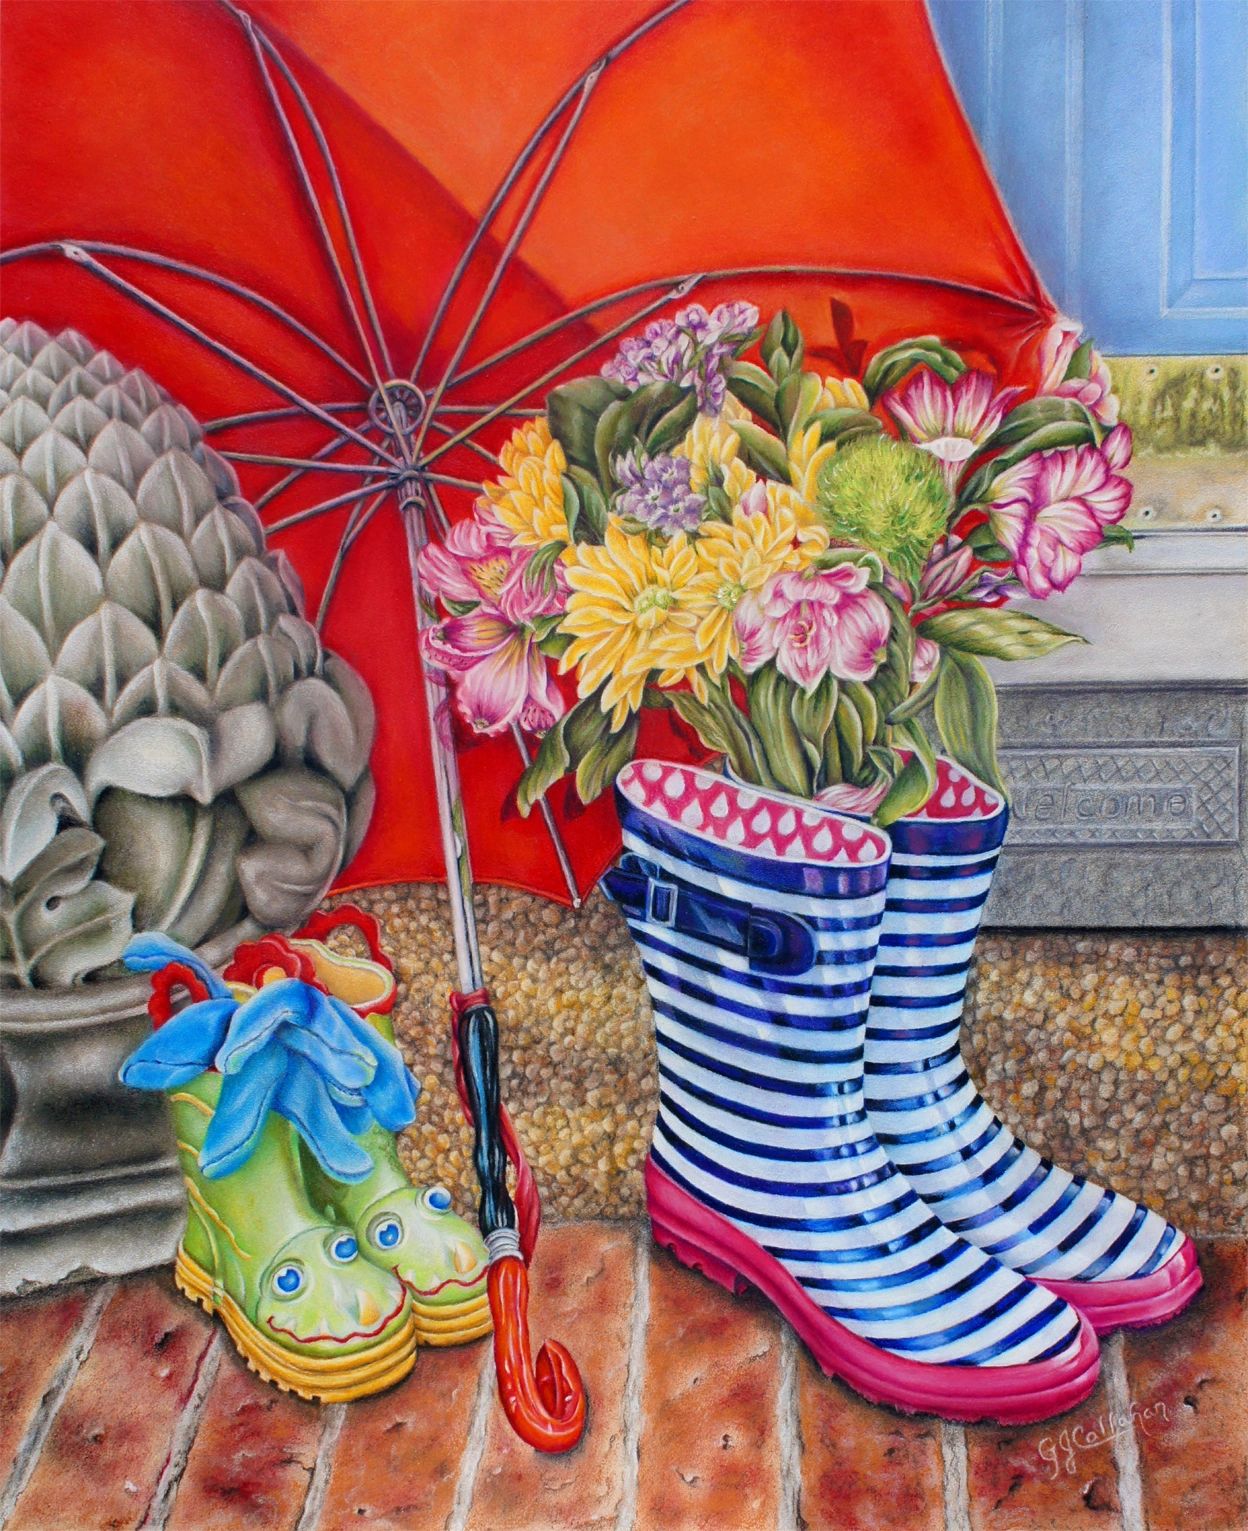 Welcome Wellies 20 X 16, Colored Pencil on Ampersand Pastelboard, Still Life 